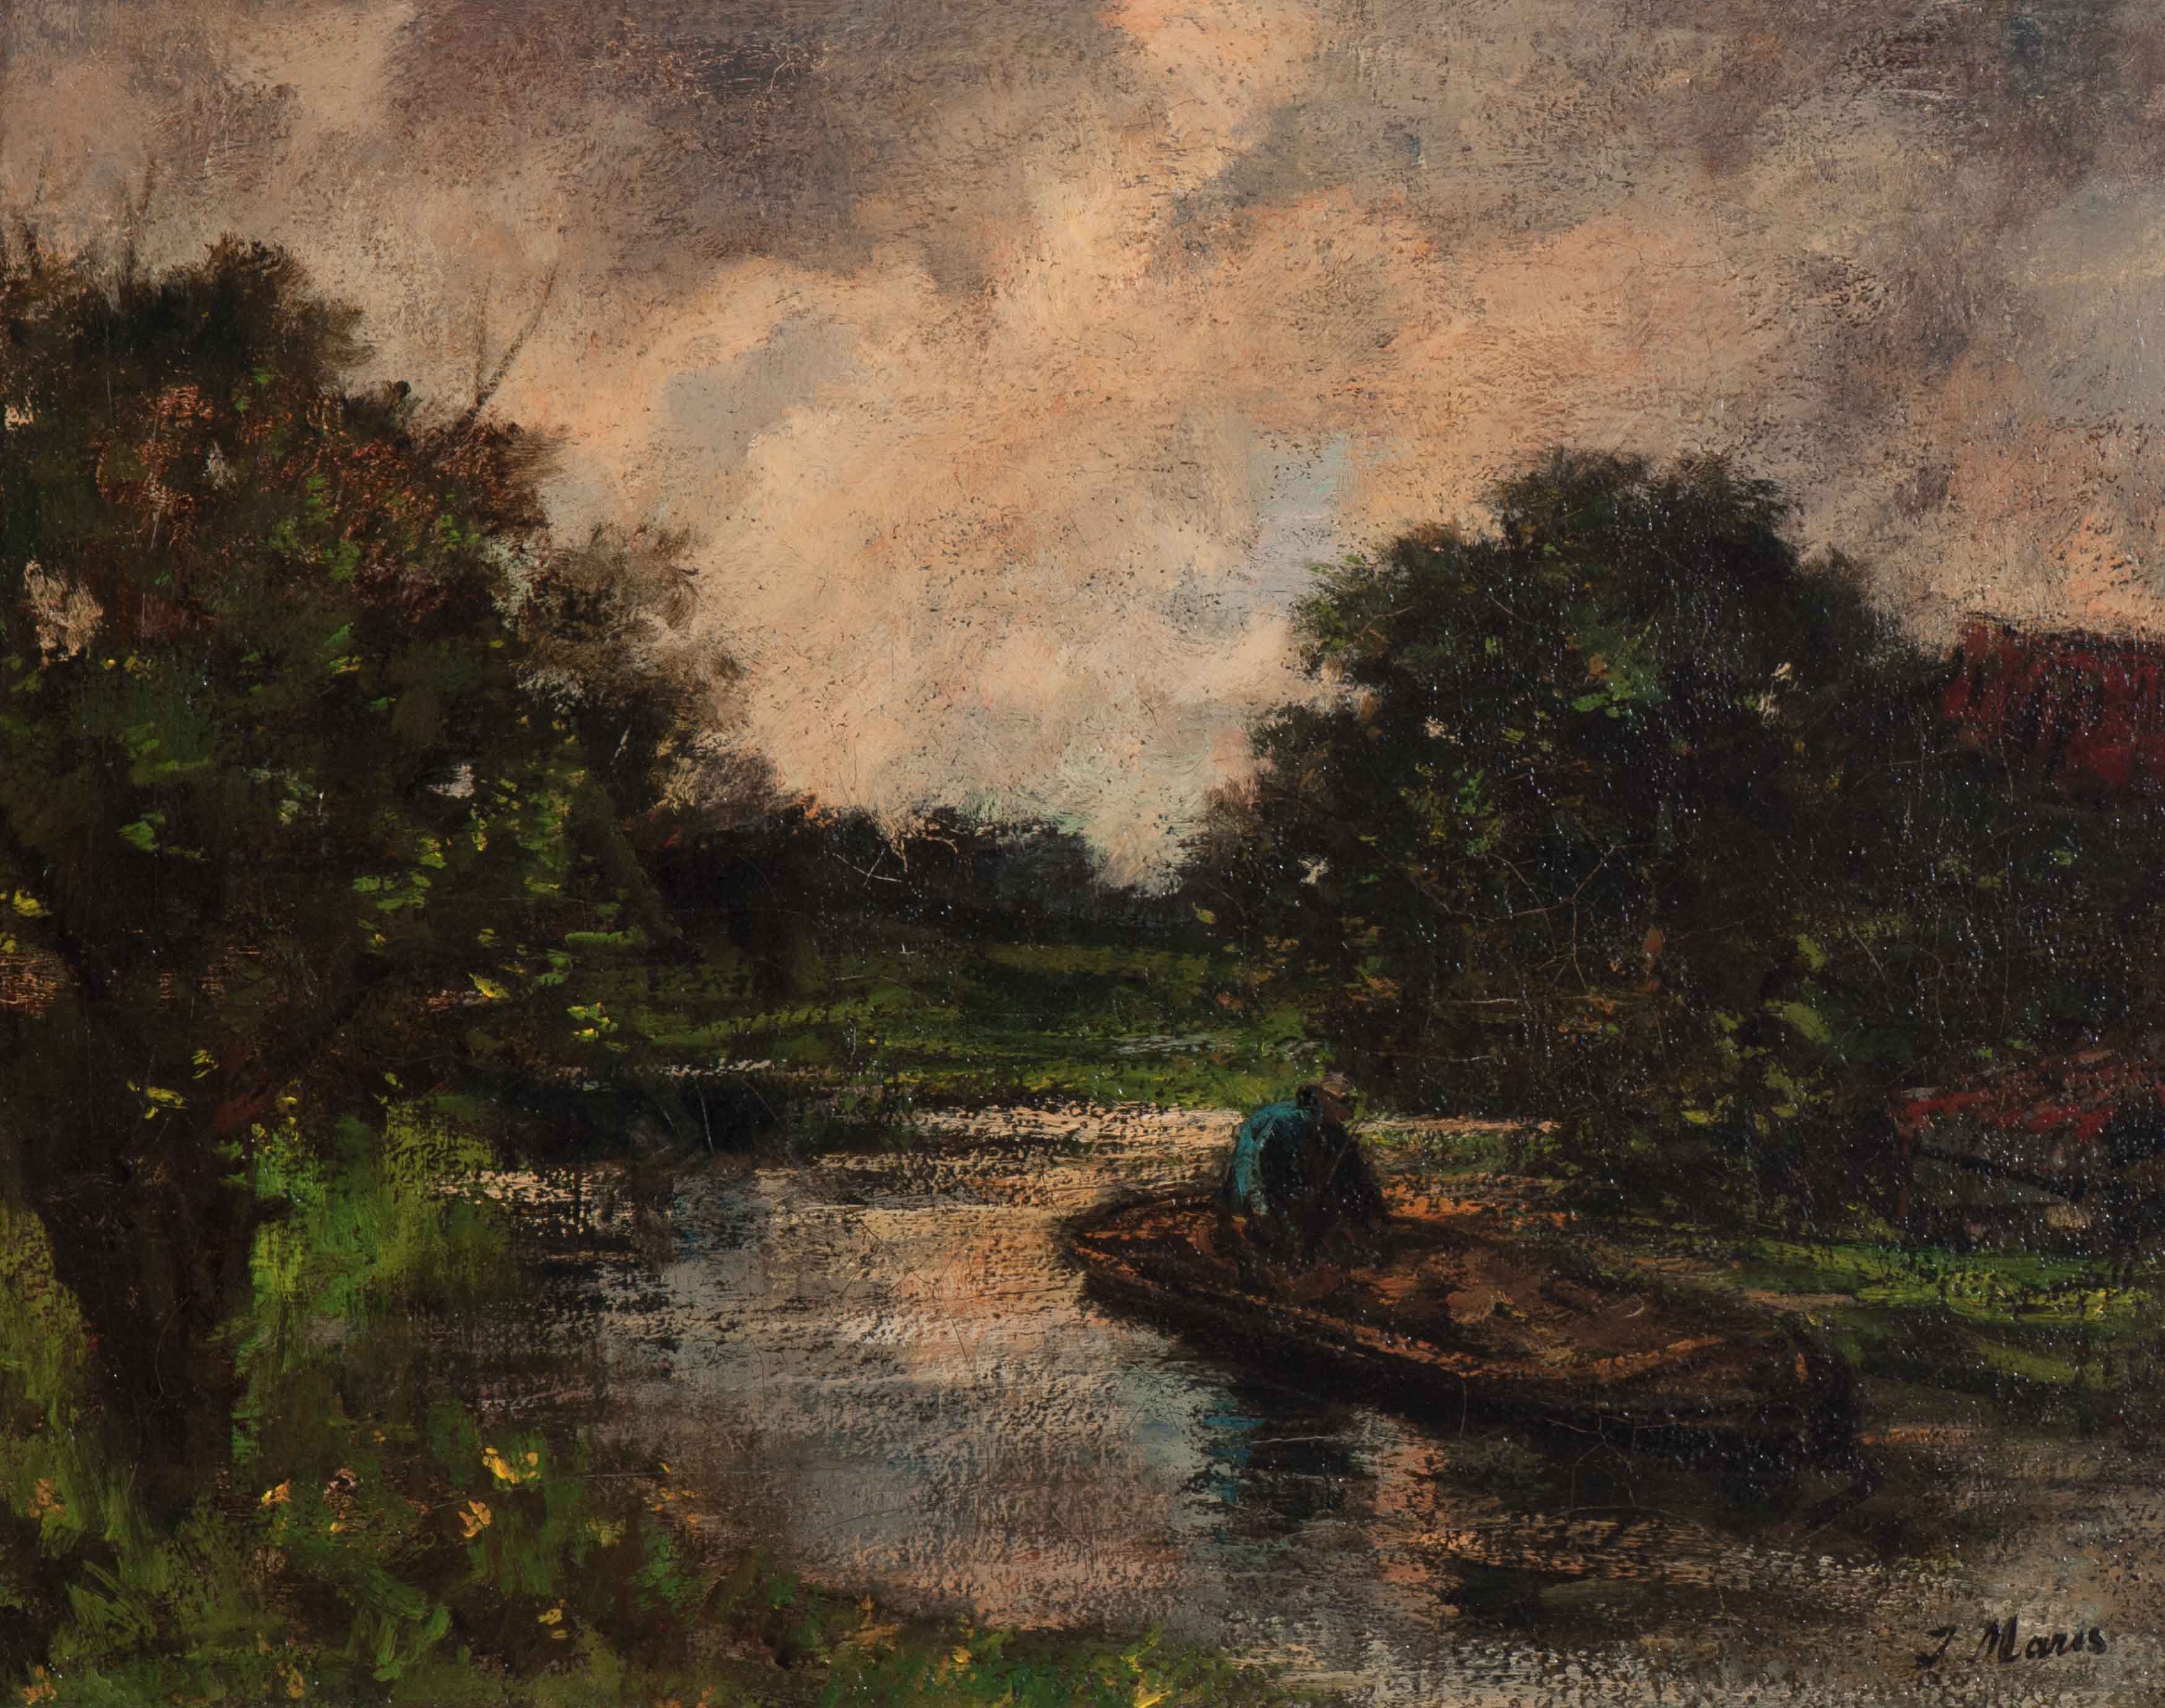 River scene with barge